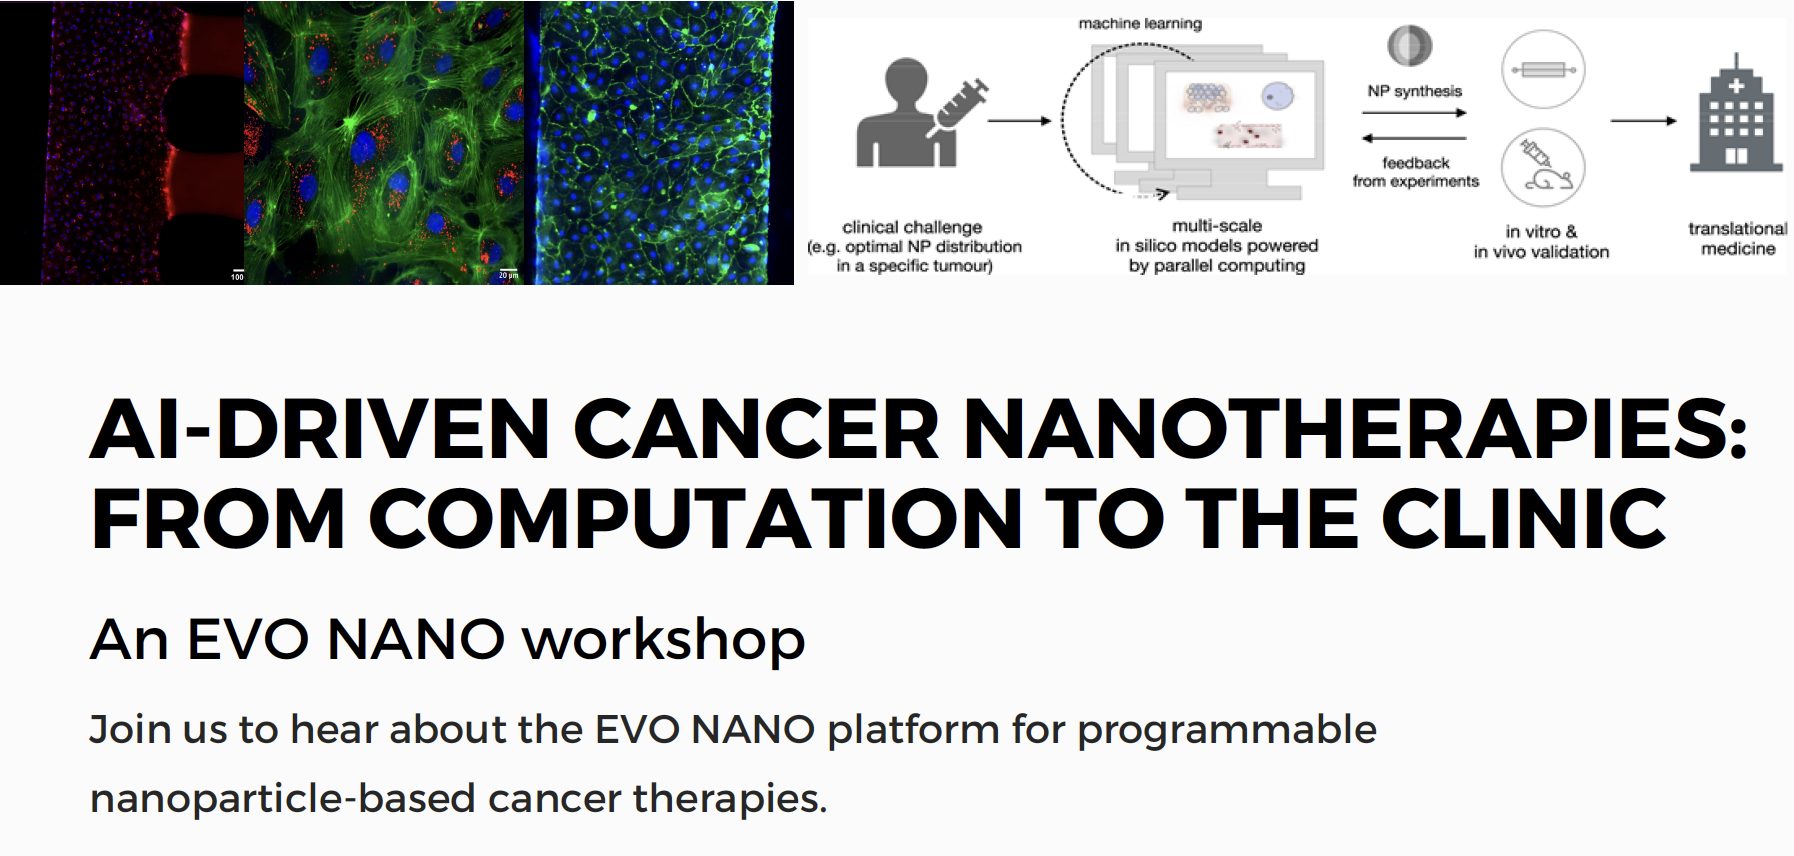 Workshop “AI-driven cancer nanotherapies: from computation to clinic” of the Evo Nano Project.